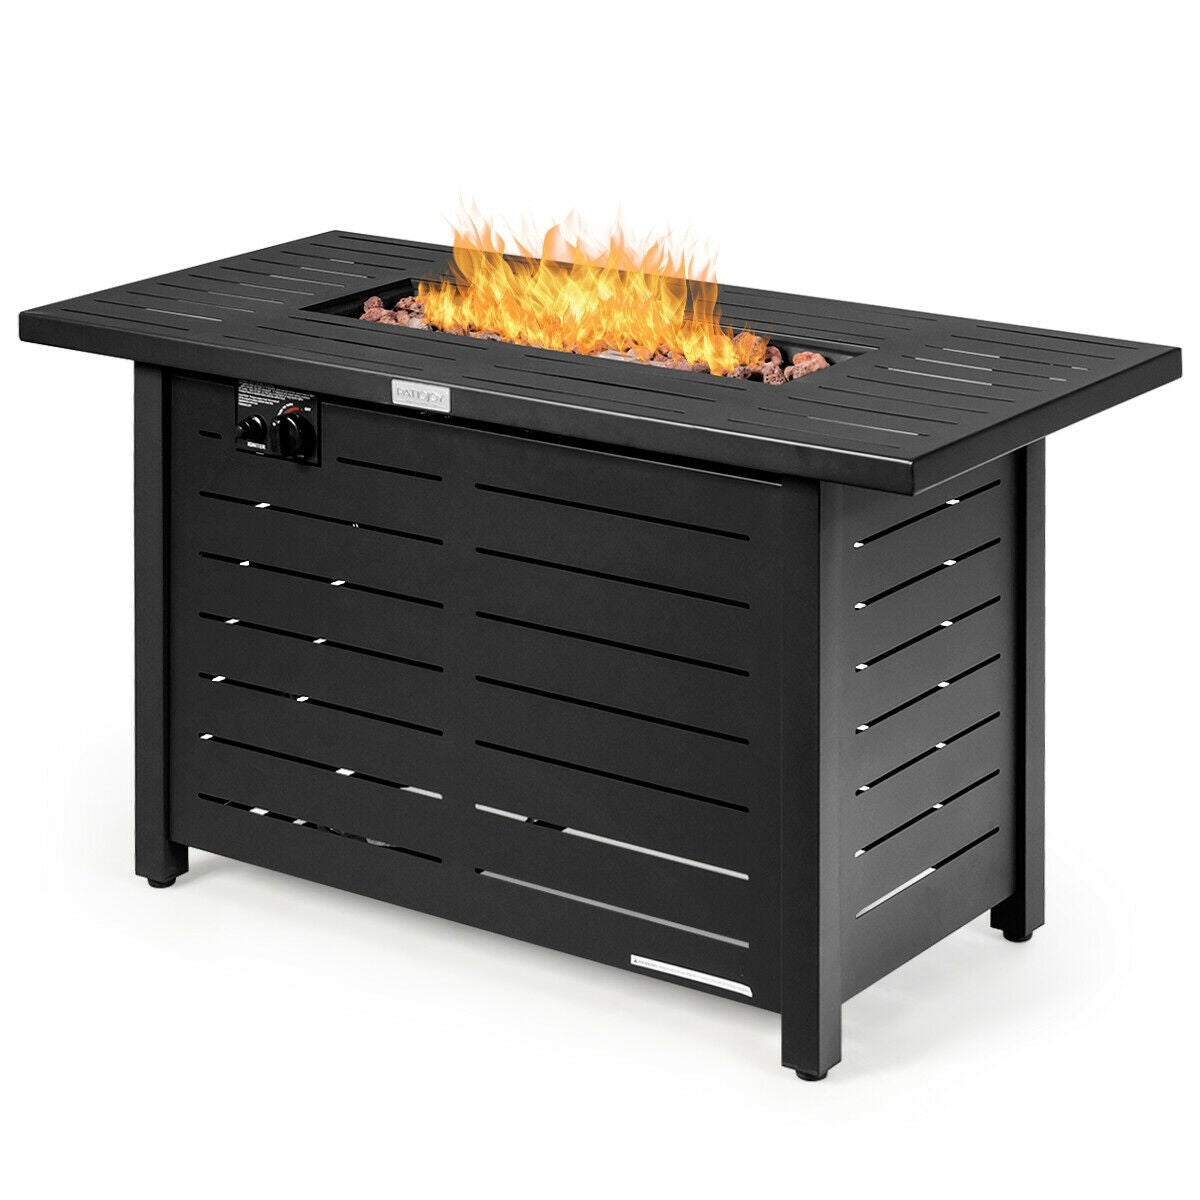 Propane Fire Pit Table, 42 Inch 60,000 BTU Rectangular Gas Fire Pit Table